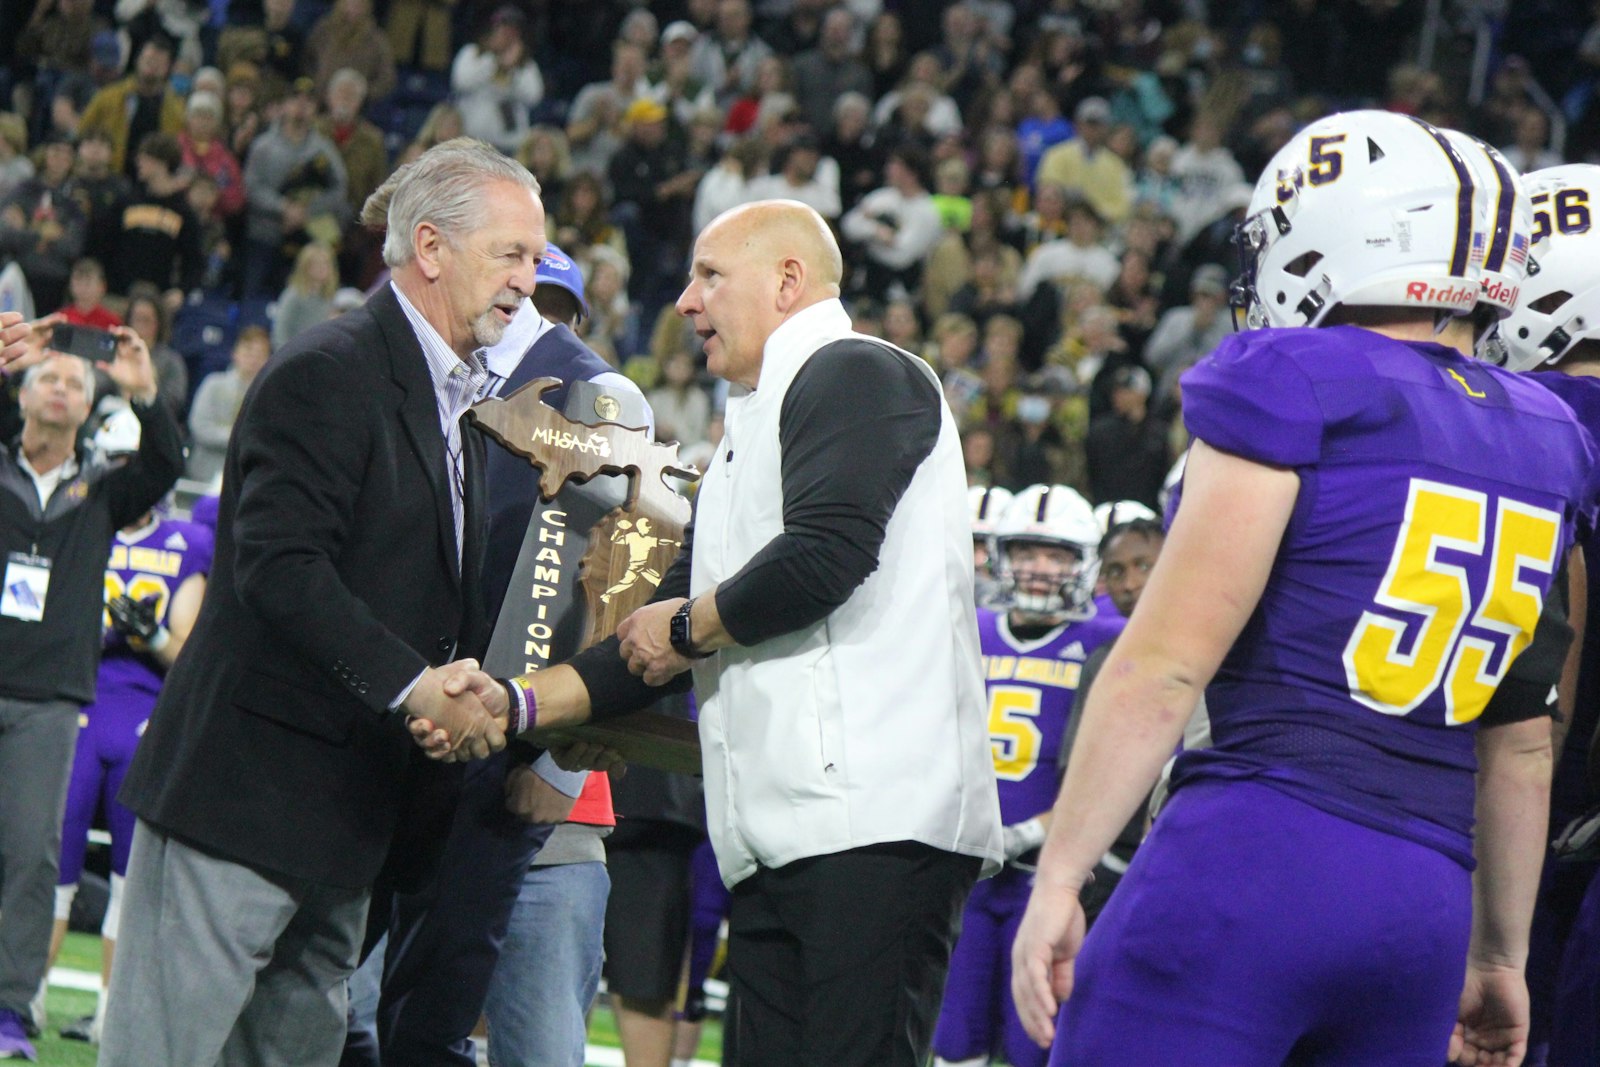 Catholic League Director Vic Michaels presents Warren De La Salle head coach and athletic director Dan Rohn with the state championship trophy – the fourth one to be claimed by the Pilots in the past decade.